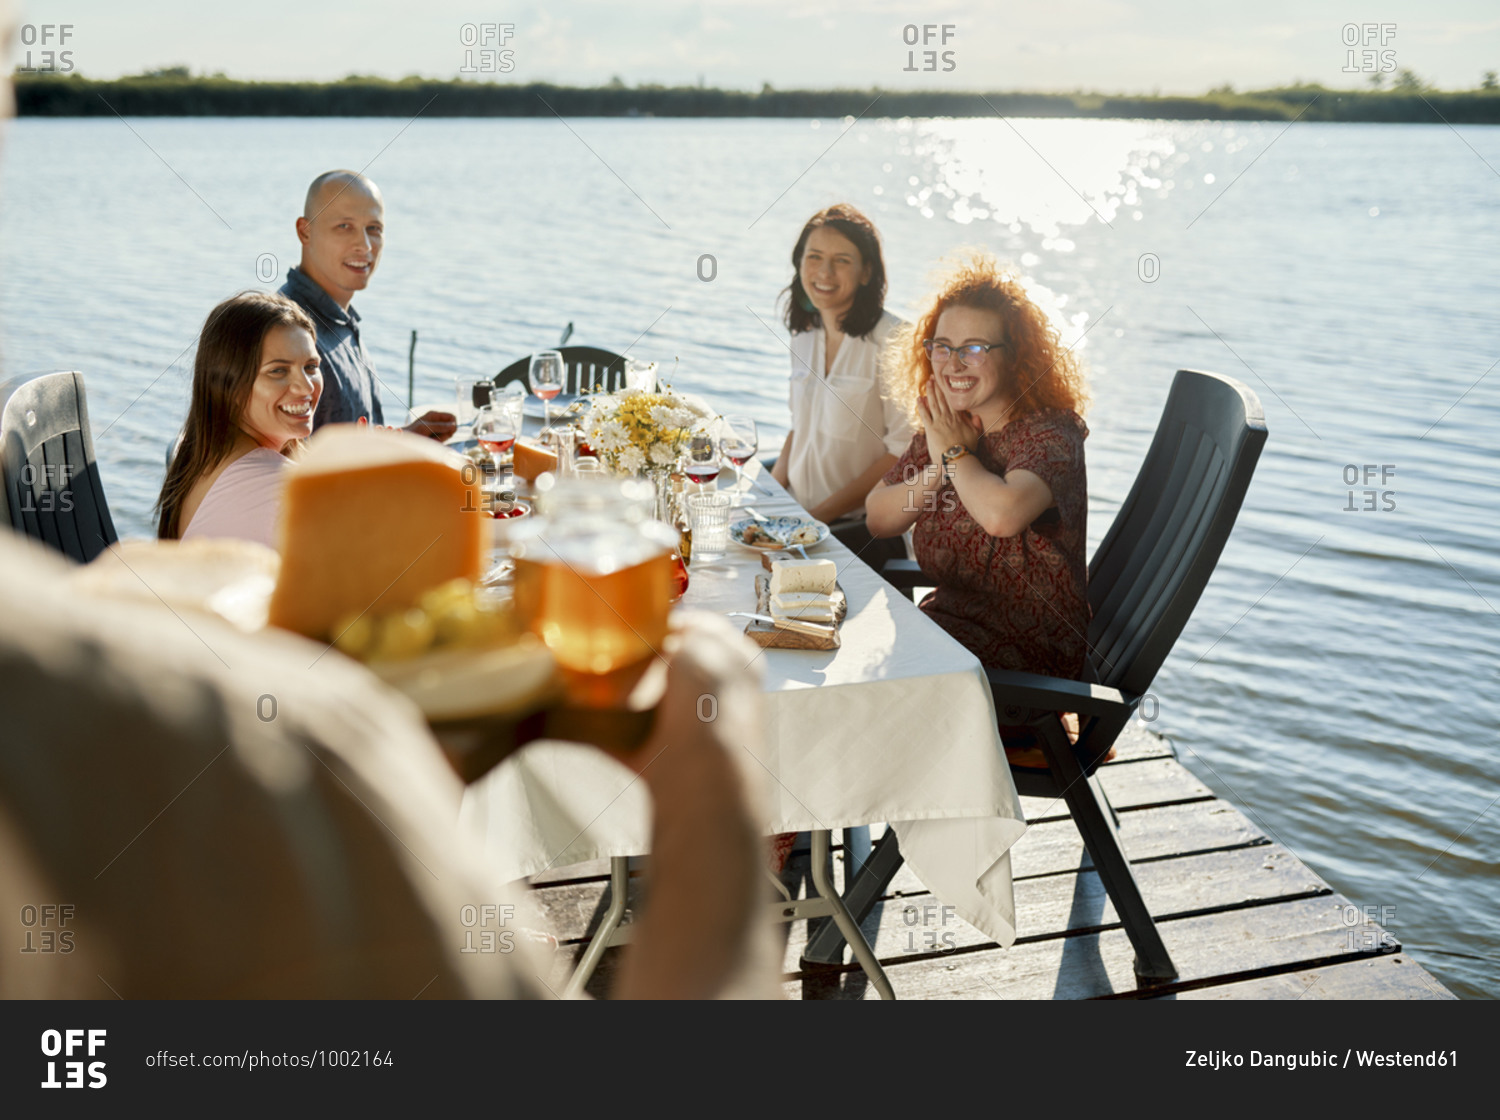 Friends having dinner at a lake with man serving cheese platter